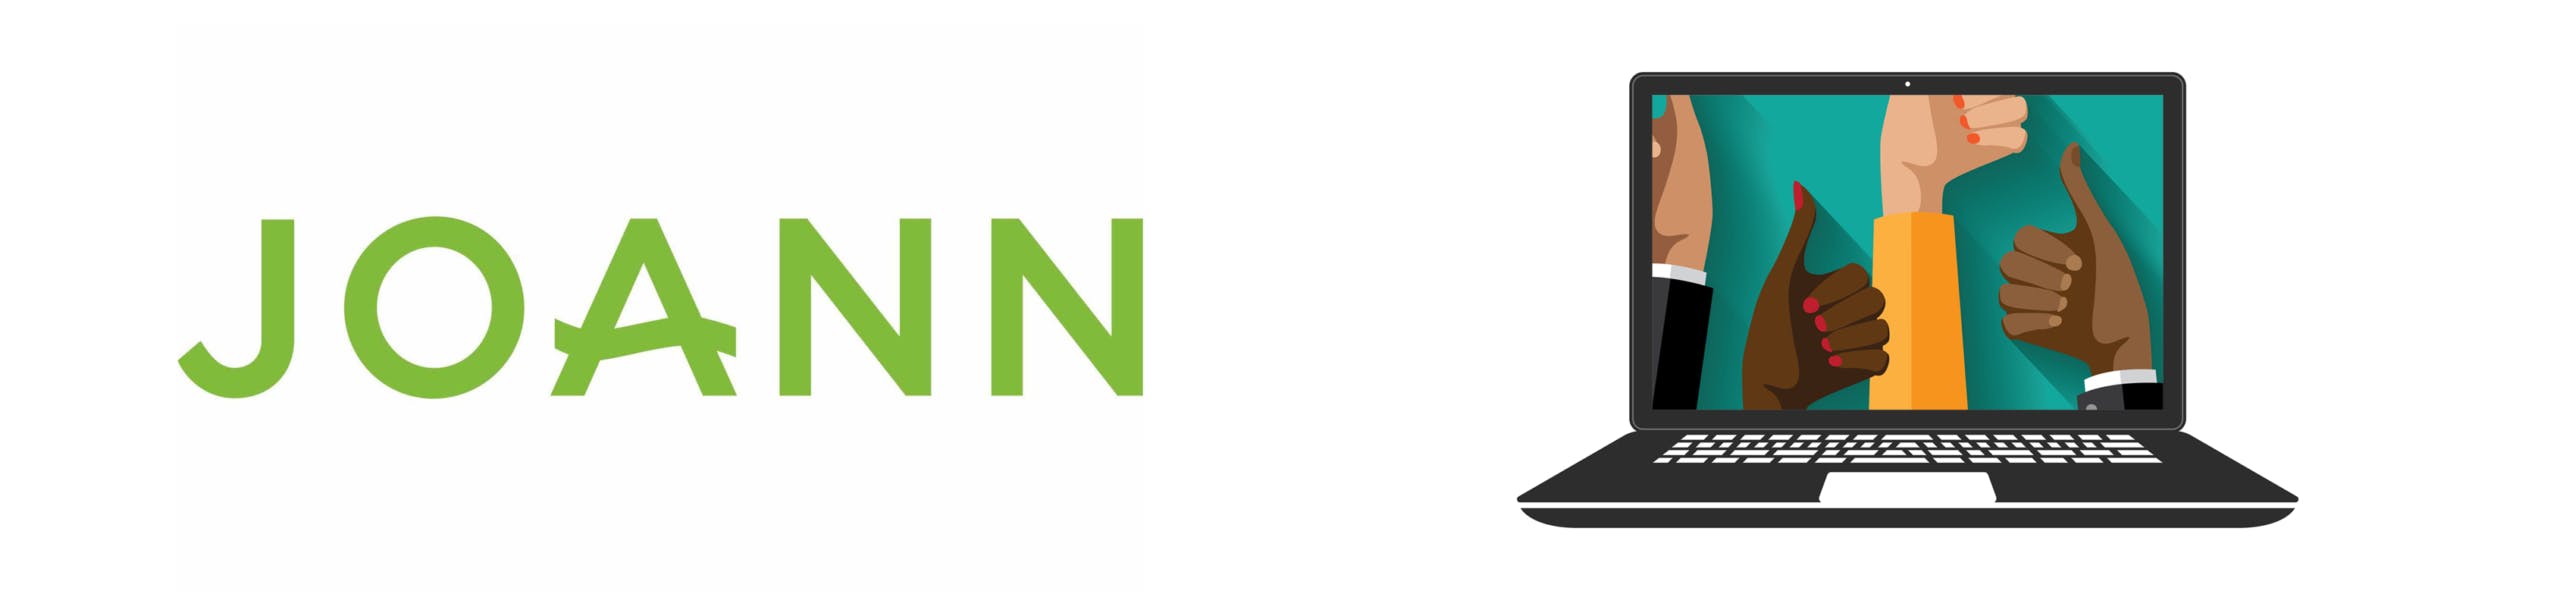 JoAnn logo next to a laptop with thumbs pointing up